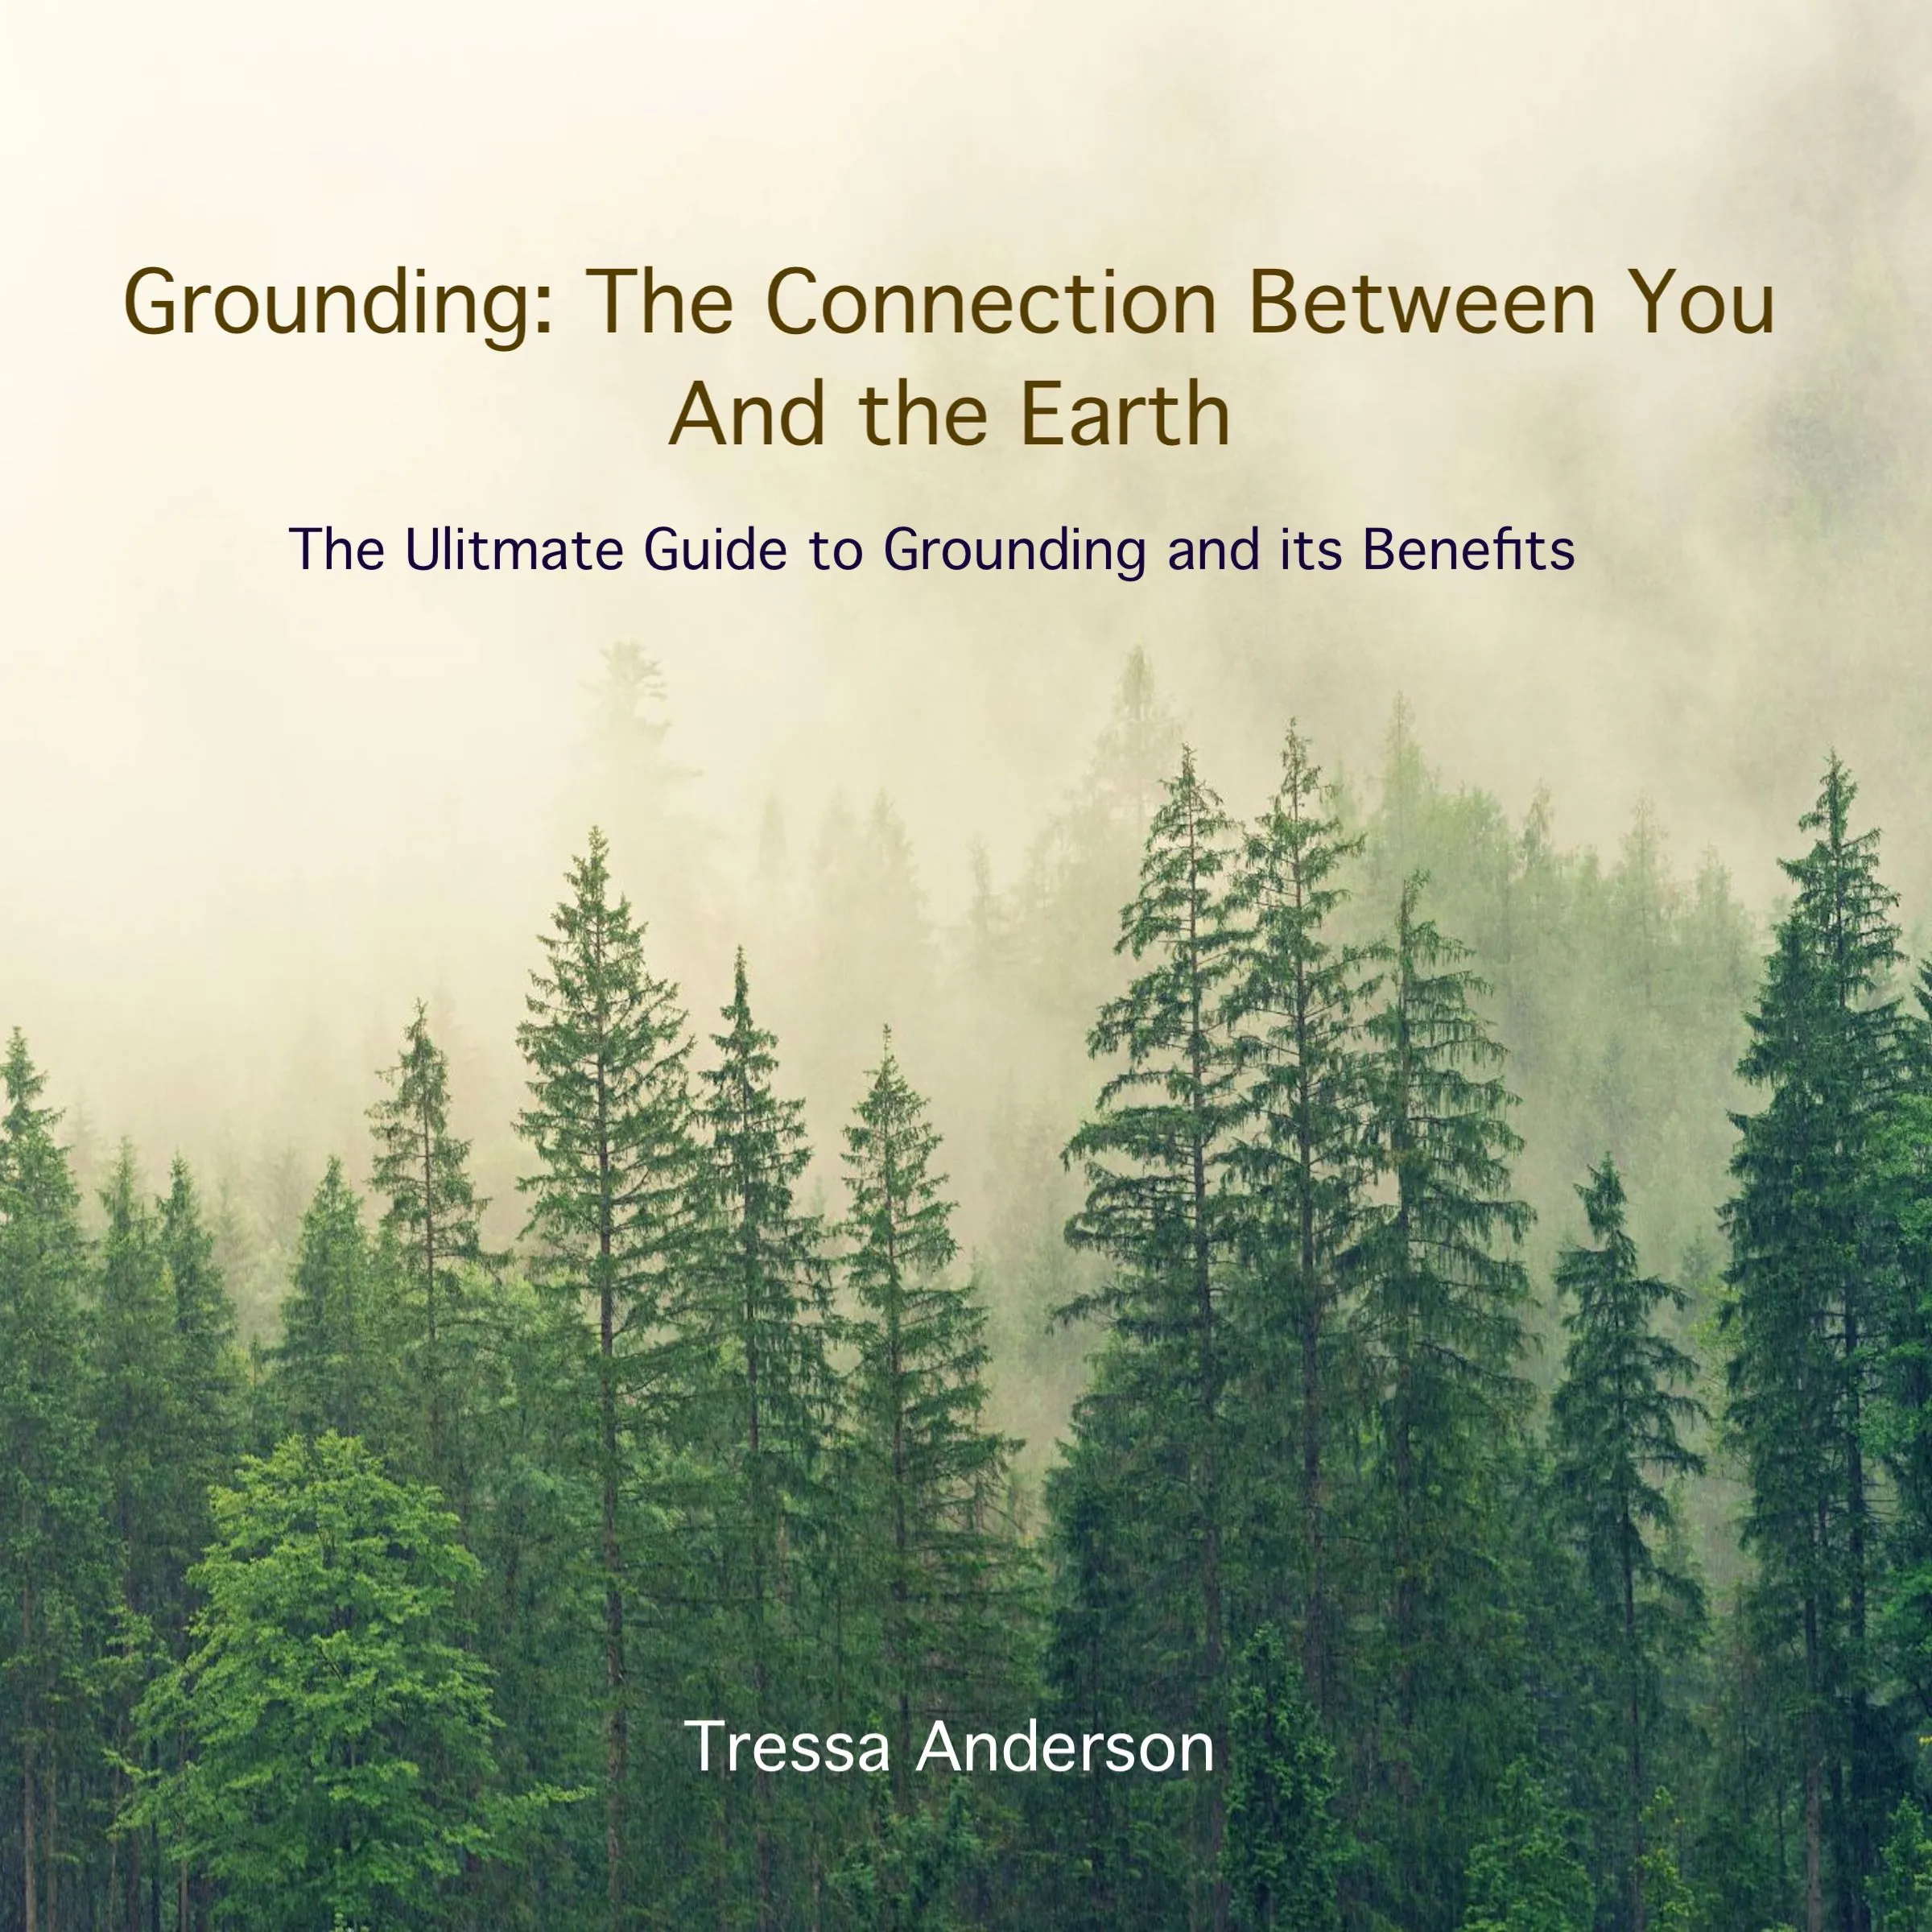 Grounding: The Connection Between You and the Earth Audiobook by Tressa Anderson